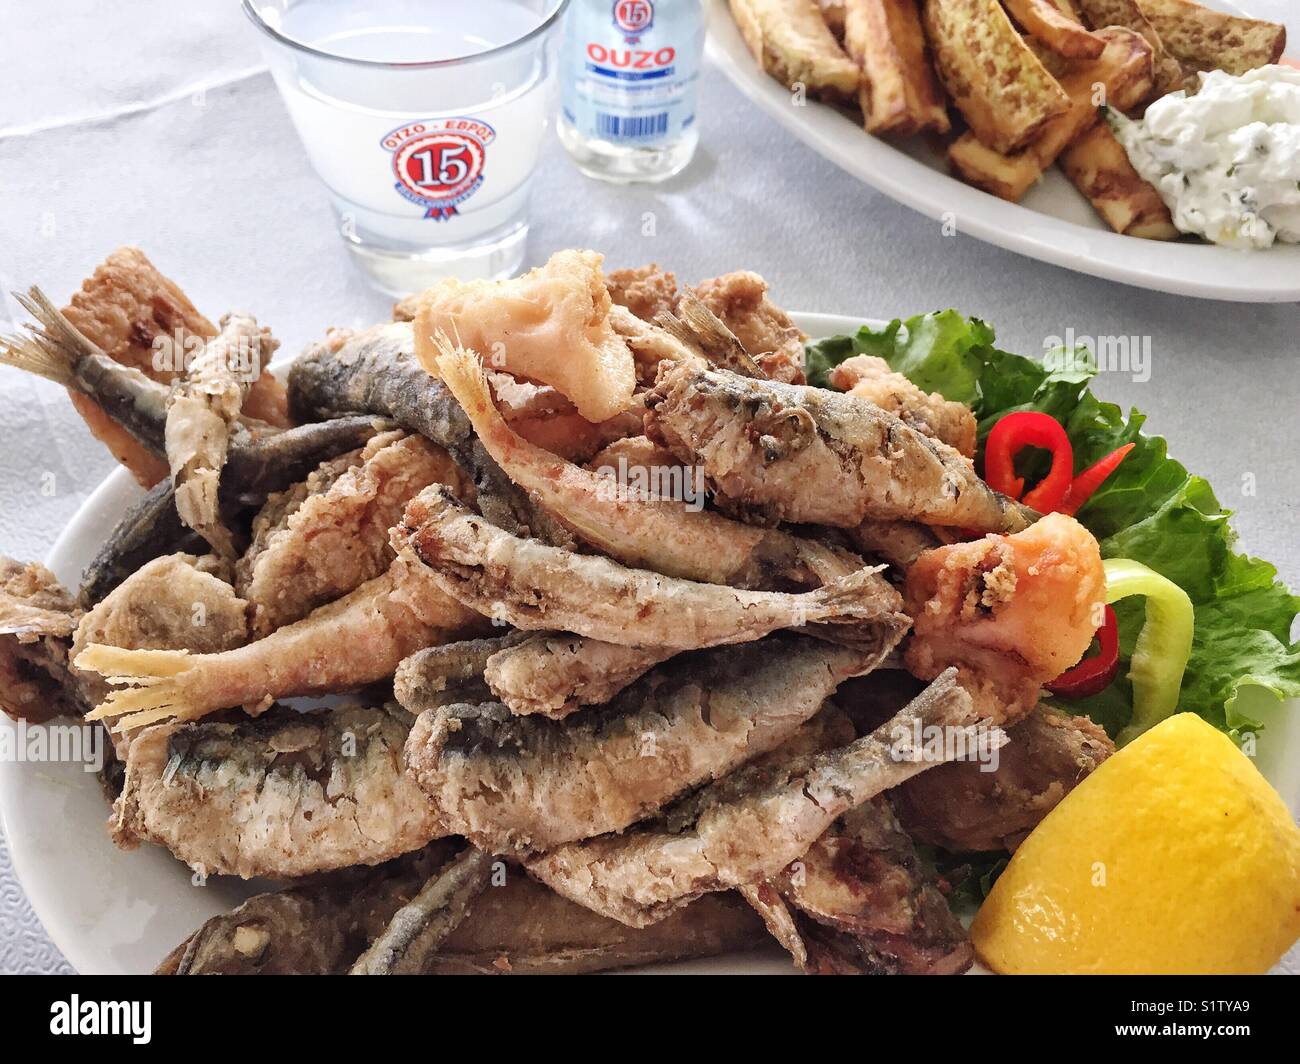 fried fish and greek drink, ouzo on table Stock Photo